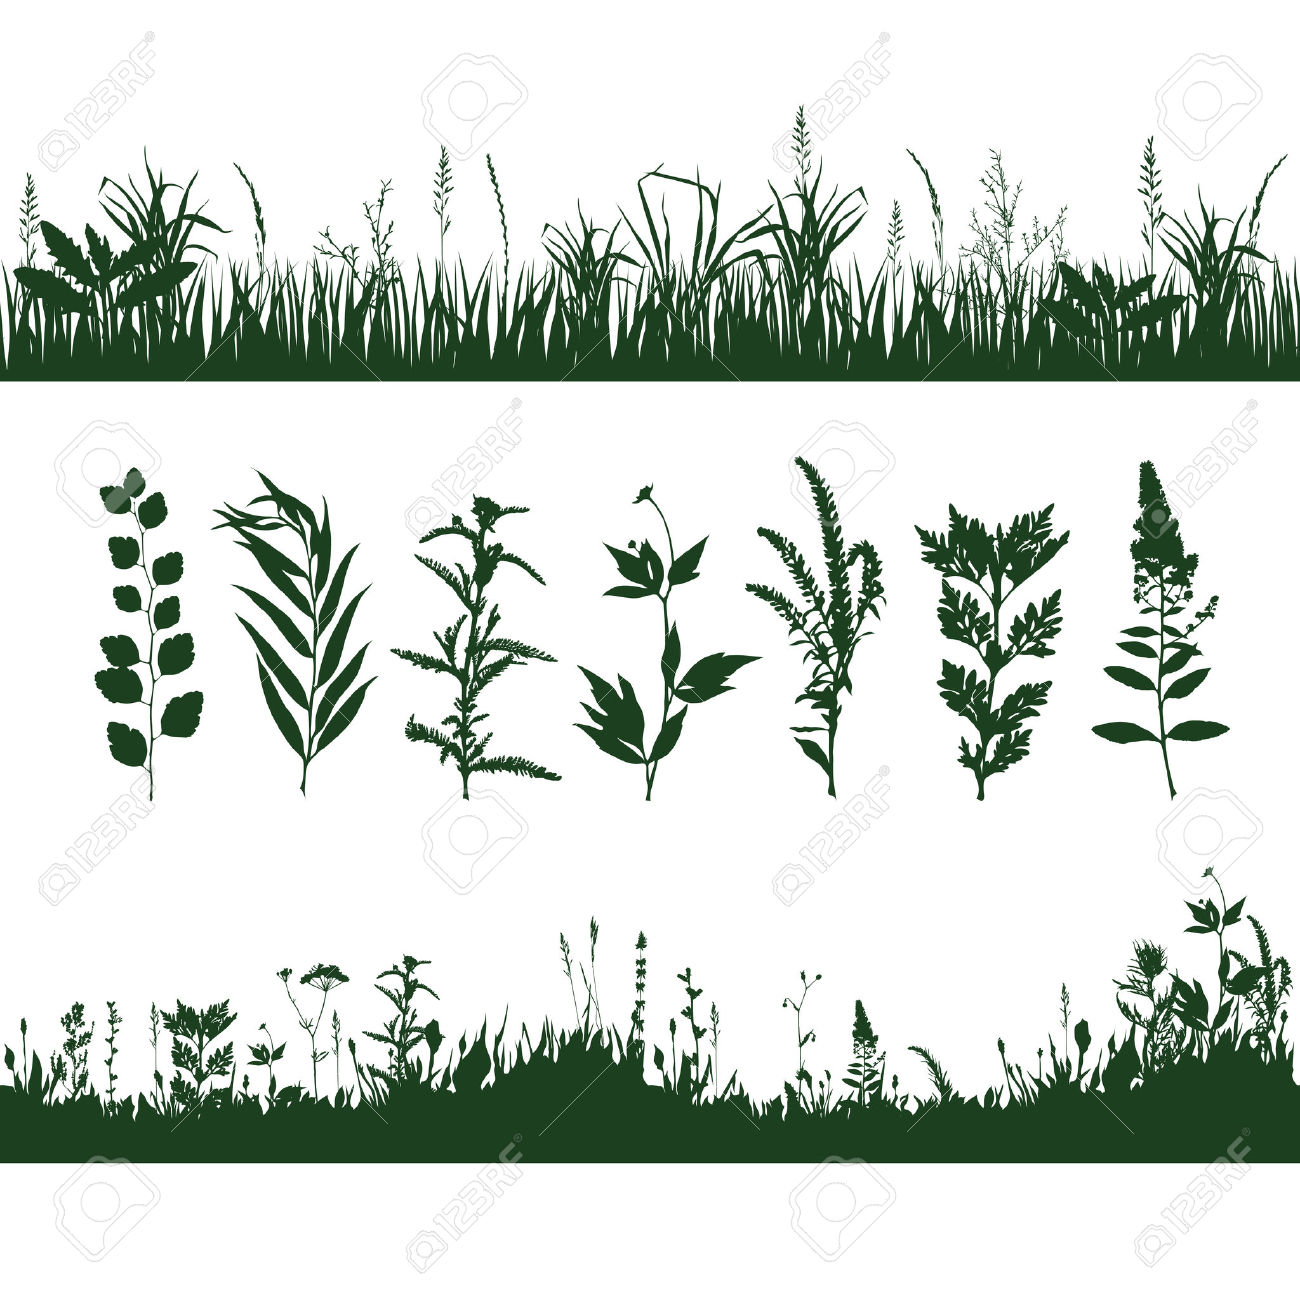 Silhouettes Meadow Grass And Twigs Of Plants. Vector Illustration.